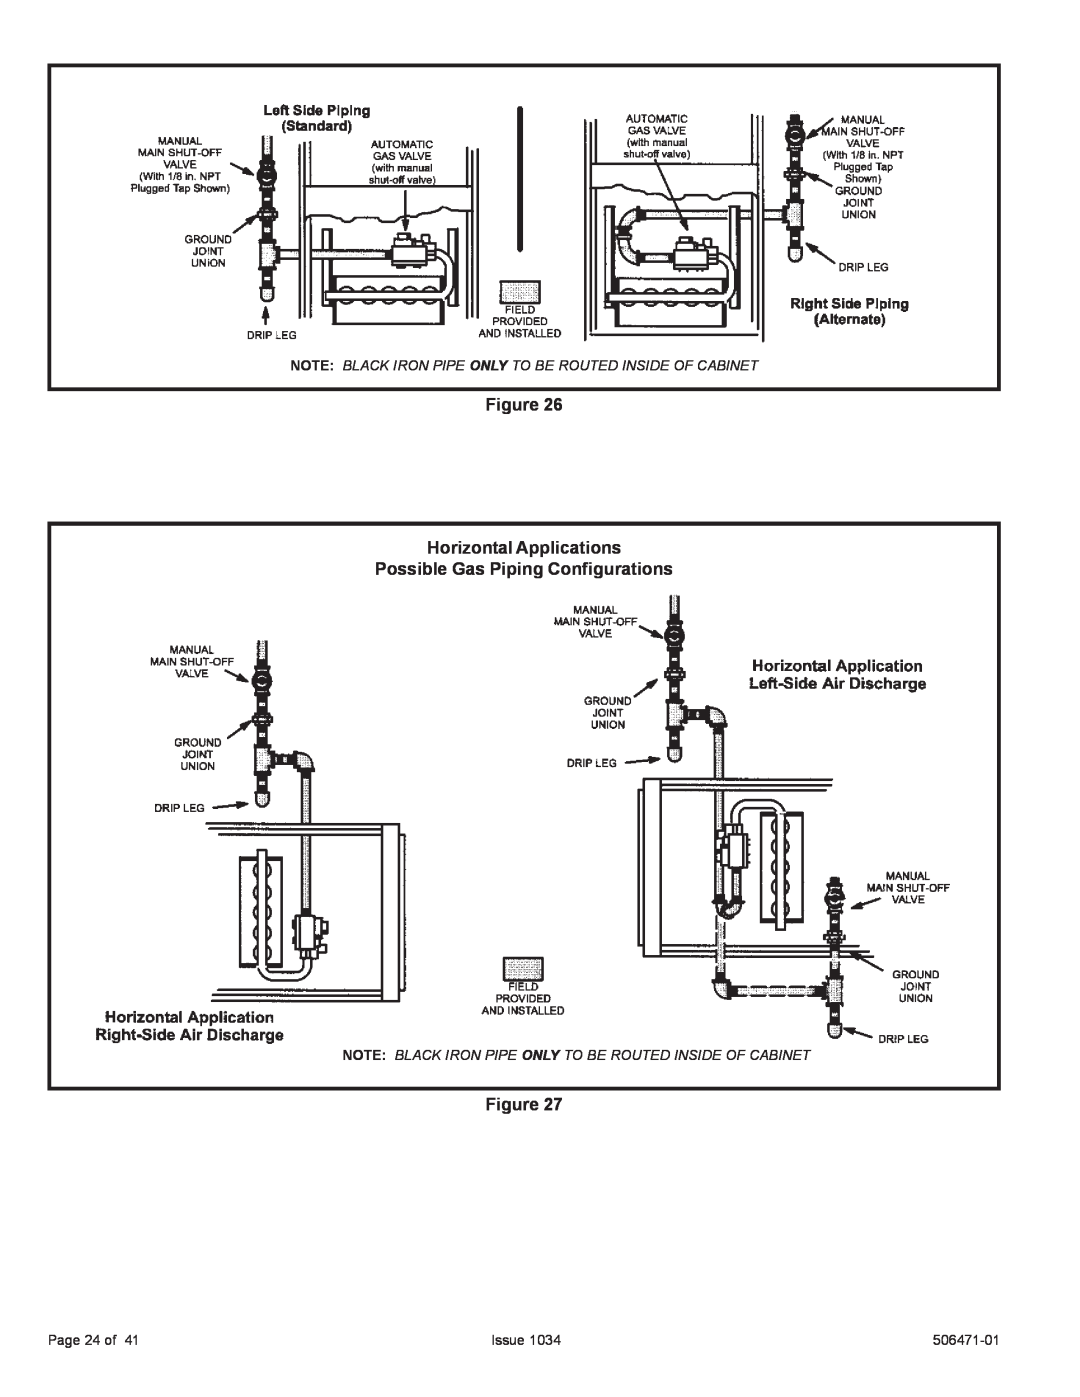 Allied Air Enterprises A80UH2V Figure Horizontal Applications, Possible Gas Piping Configurations, Page 24 of, Issue 